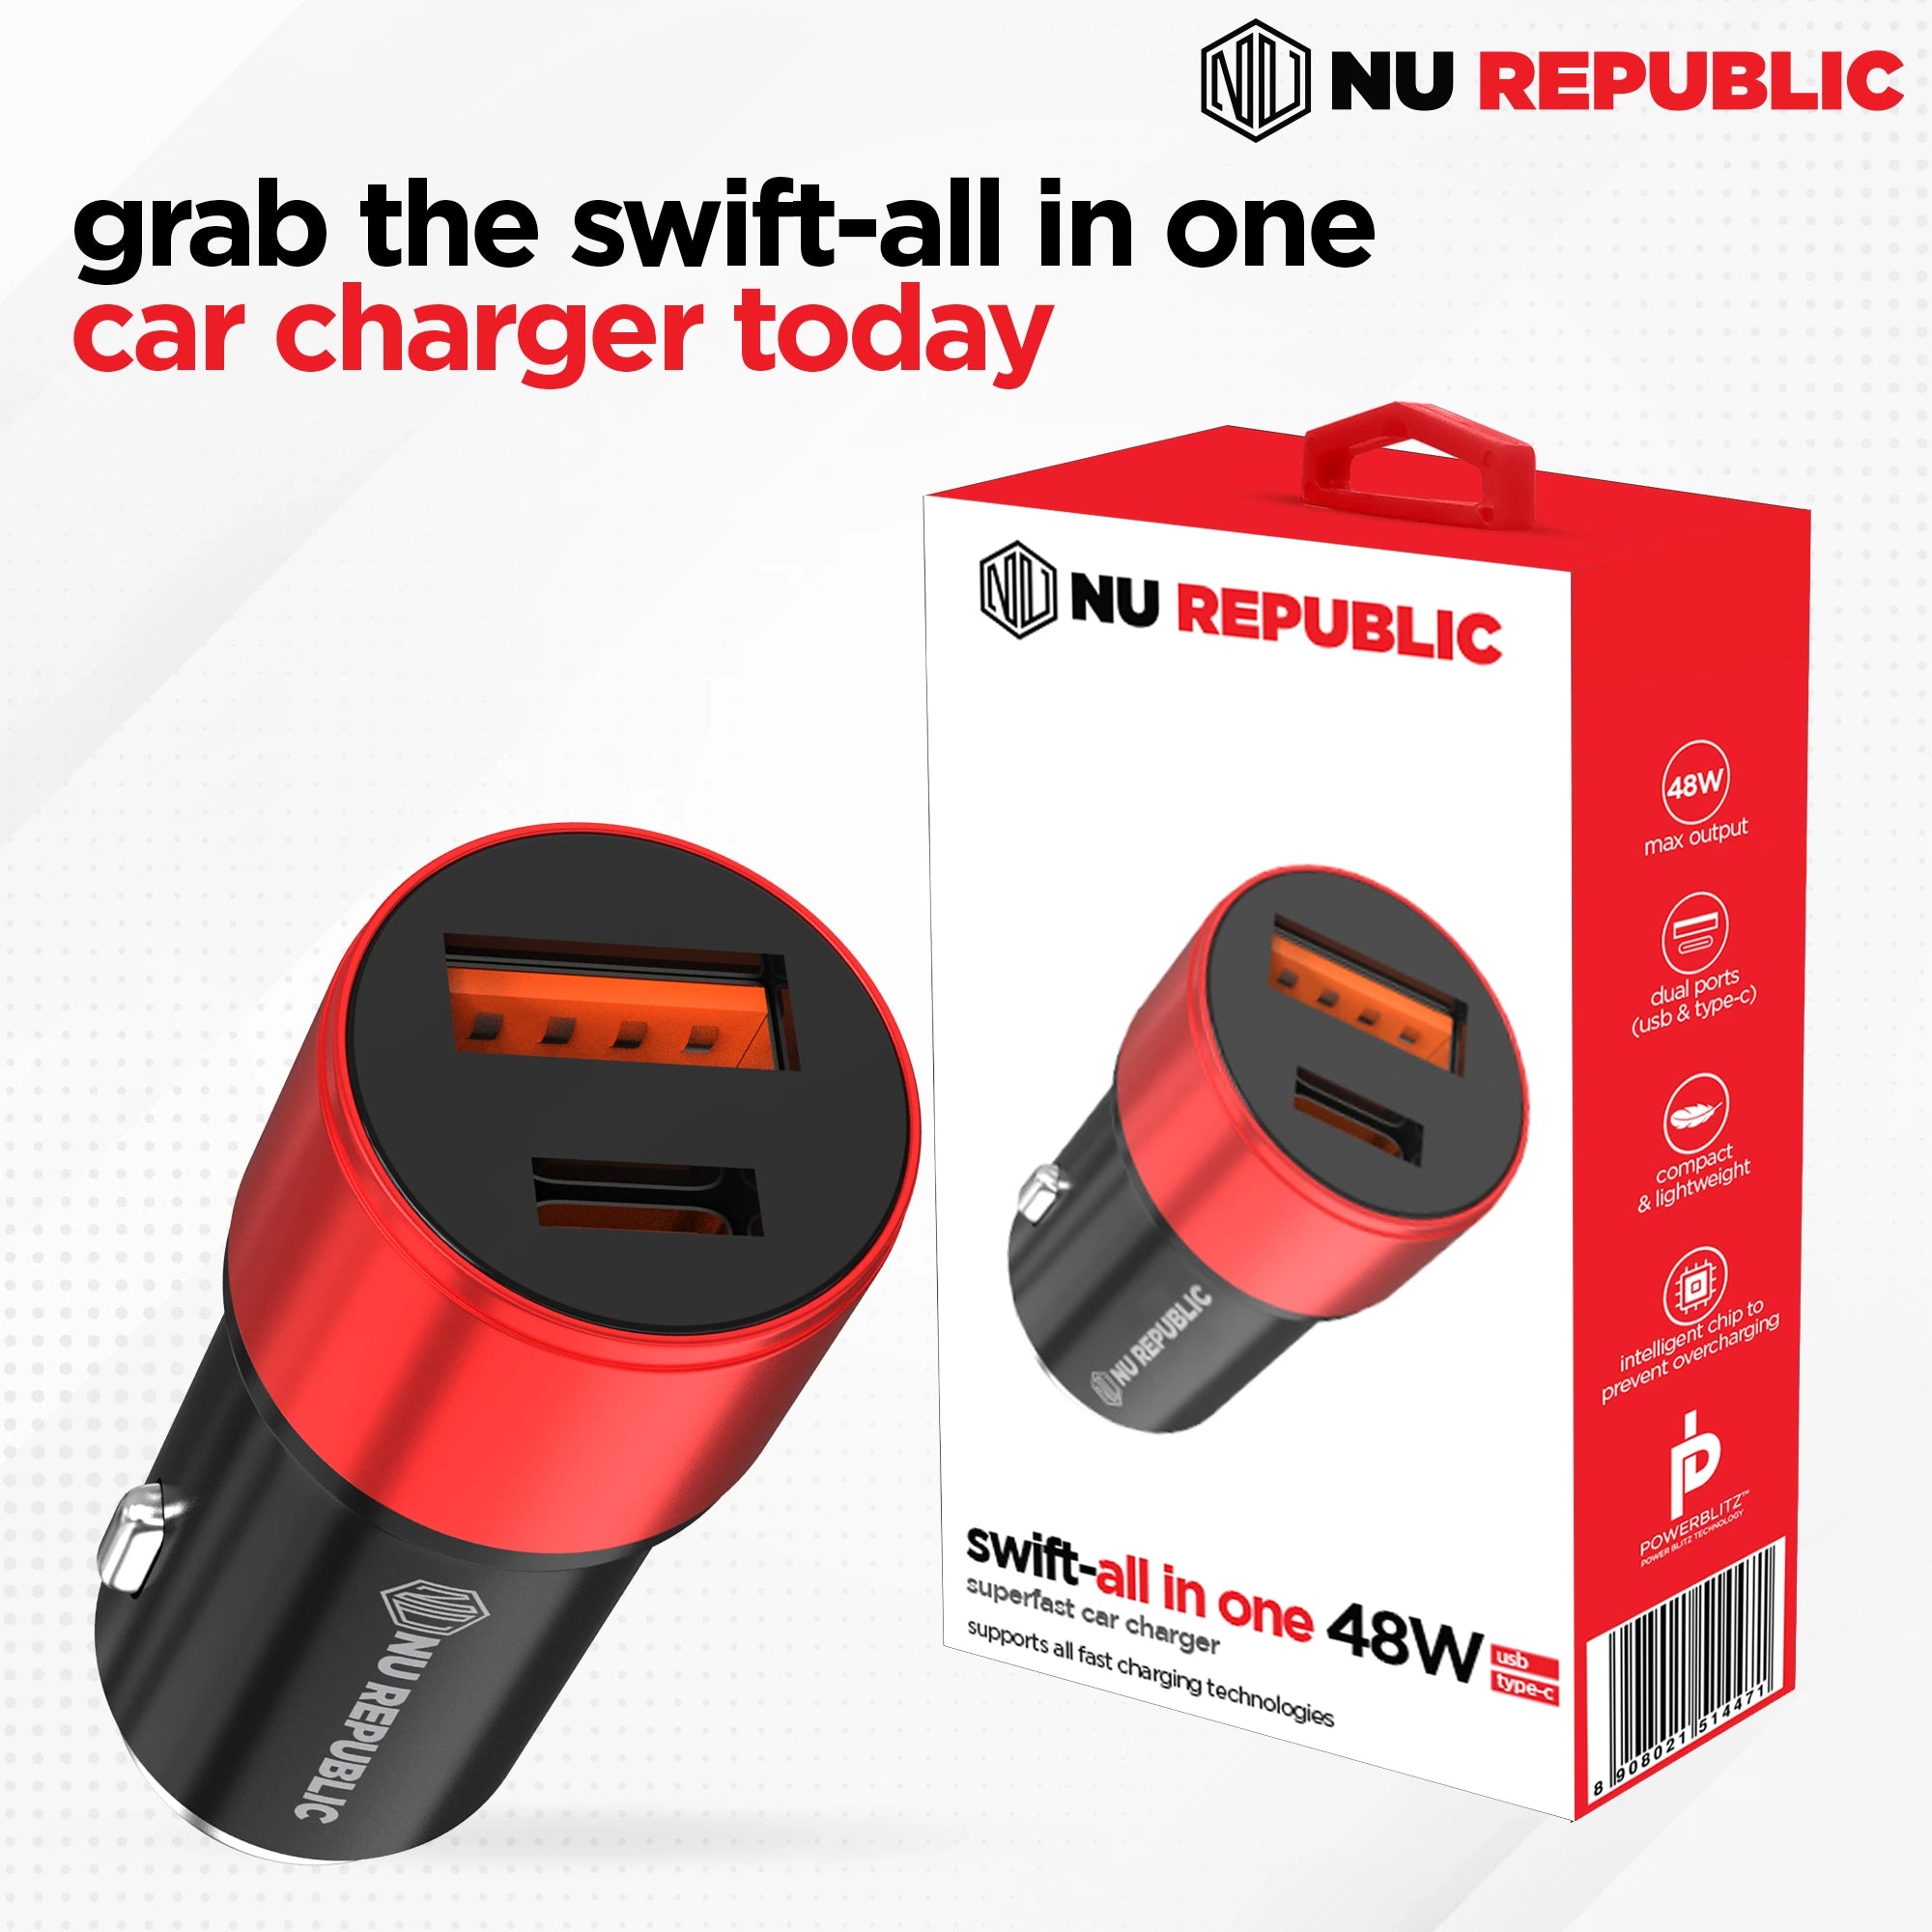 Swift All in one 48W Car Charger